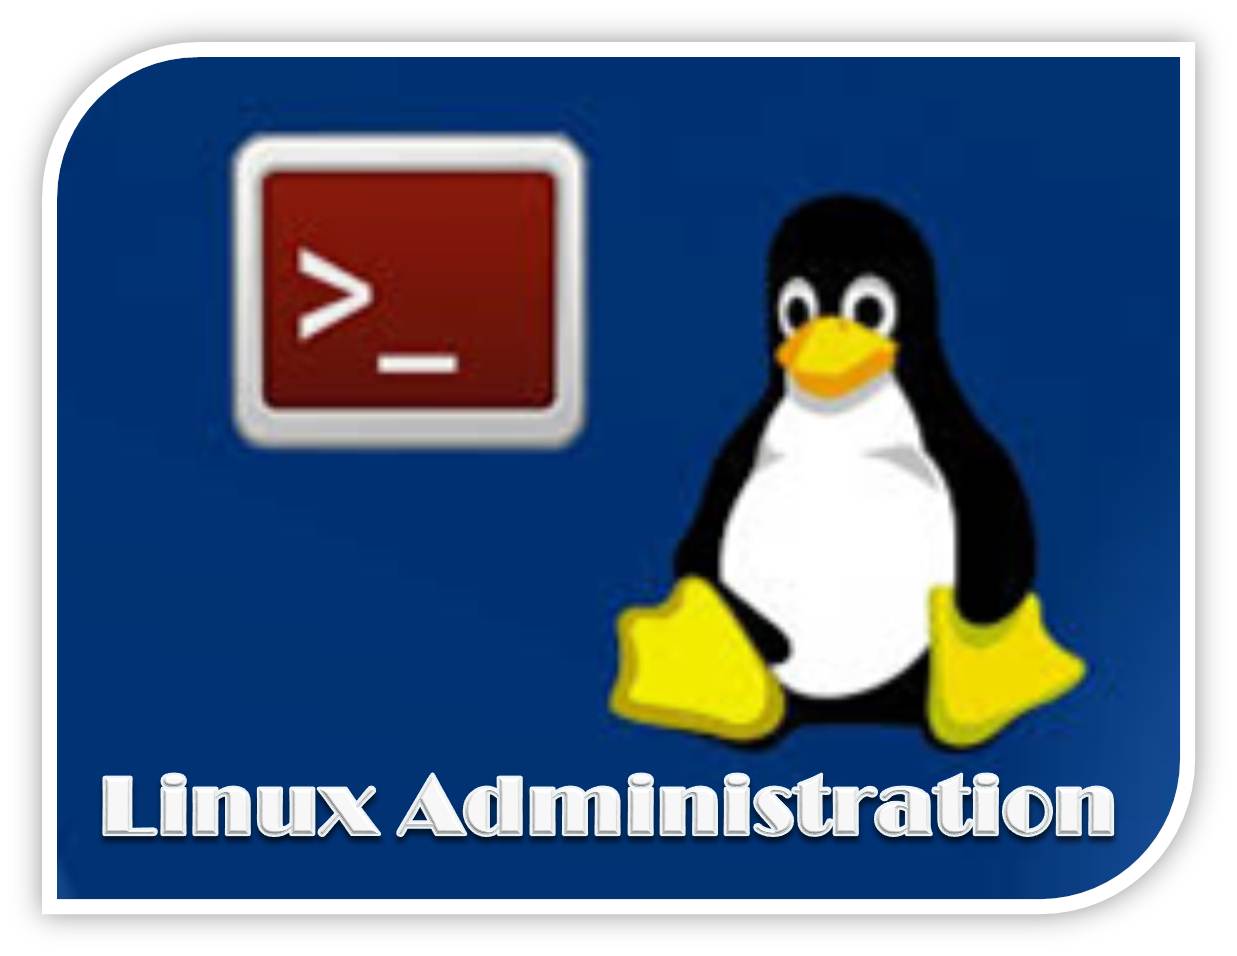 http://study.aisectonline.com/images/Linux Operating System - Operations and Management.jpg